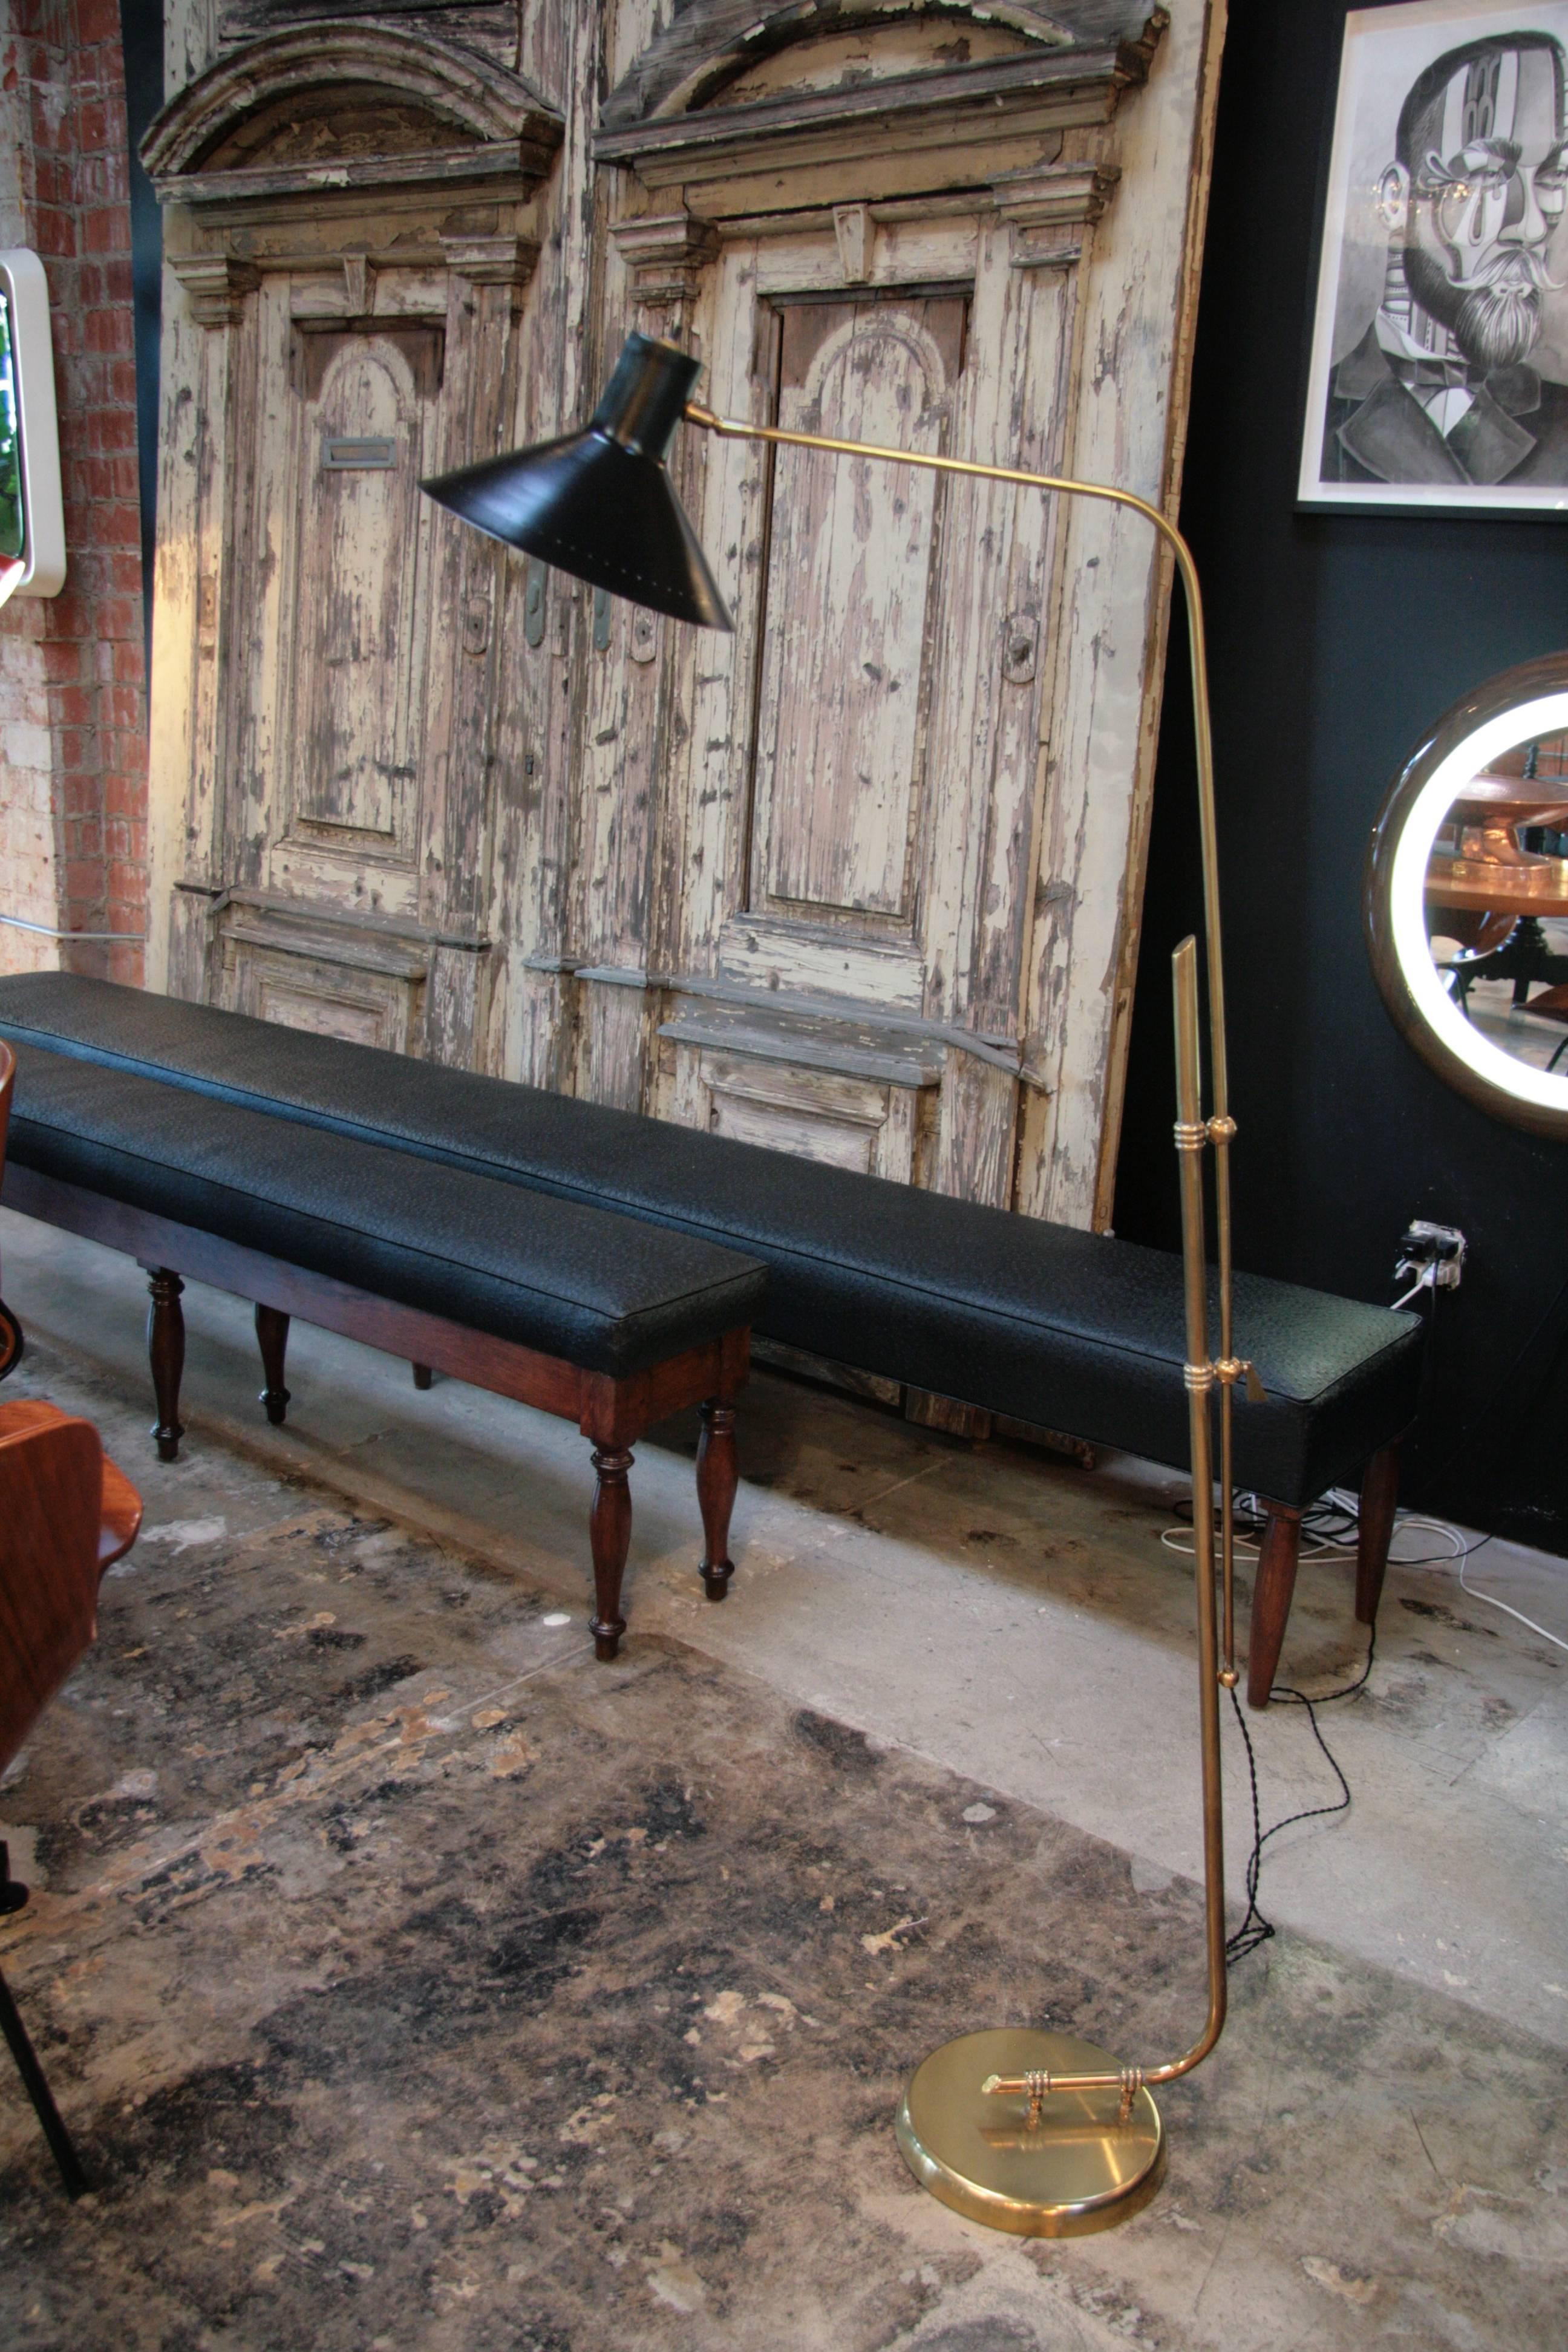 Italian 1960 floor lamp with brass base and black lacquered shade.
Adds style to any room.